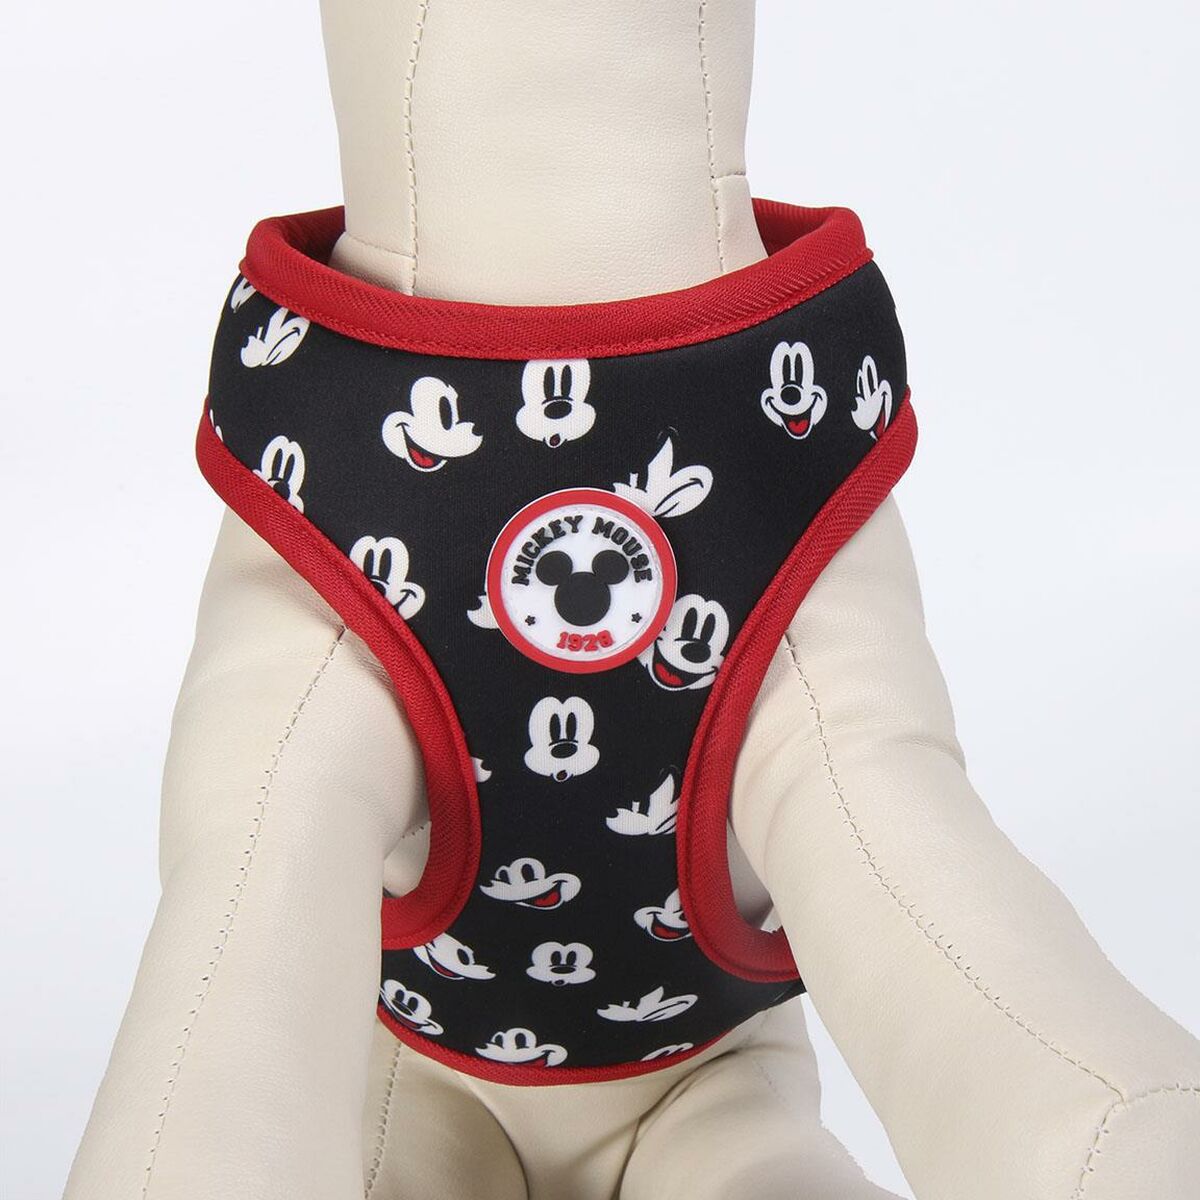 Dog Harness Mickey Mouse S/M Black